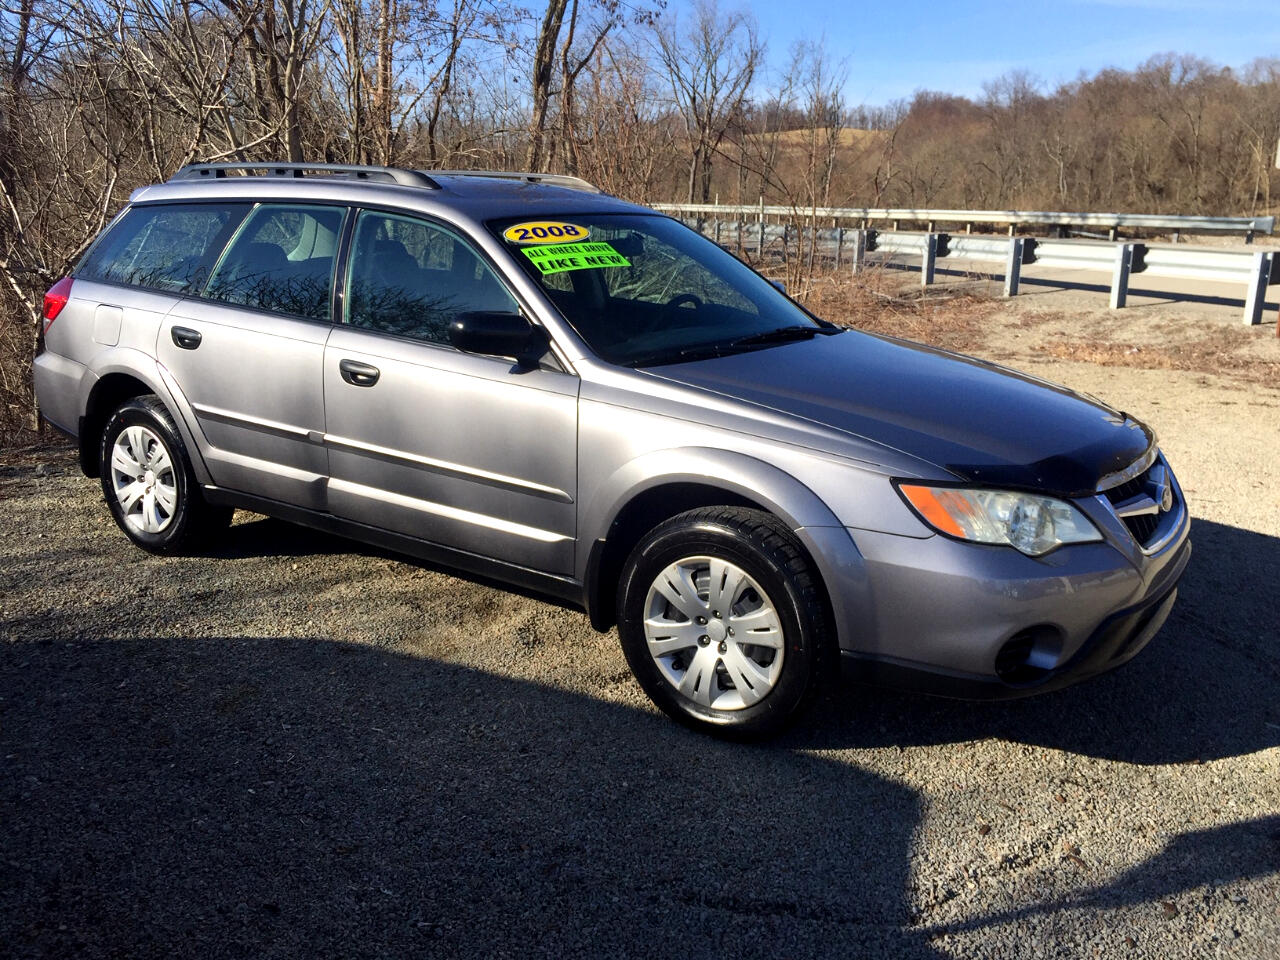 Used 2008 Subaru Outback Base for Sale in Brownsville PA